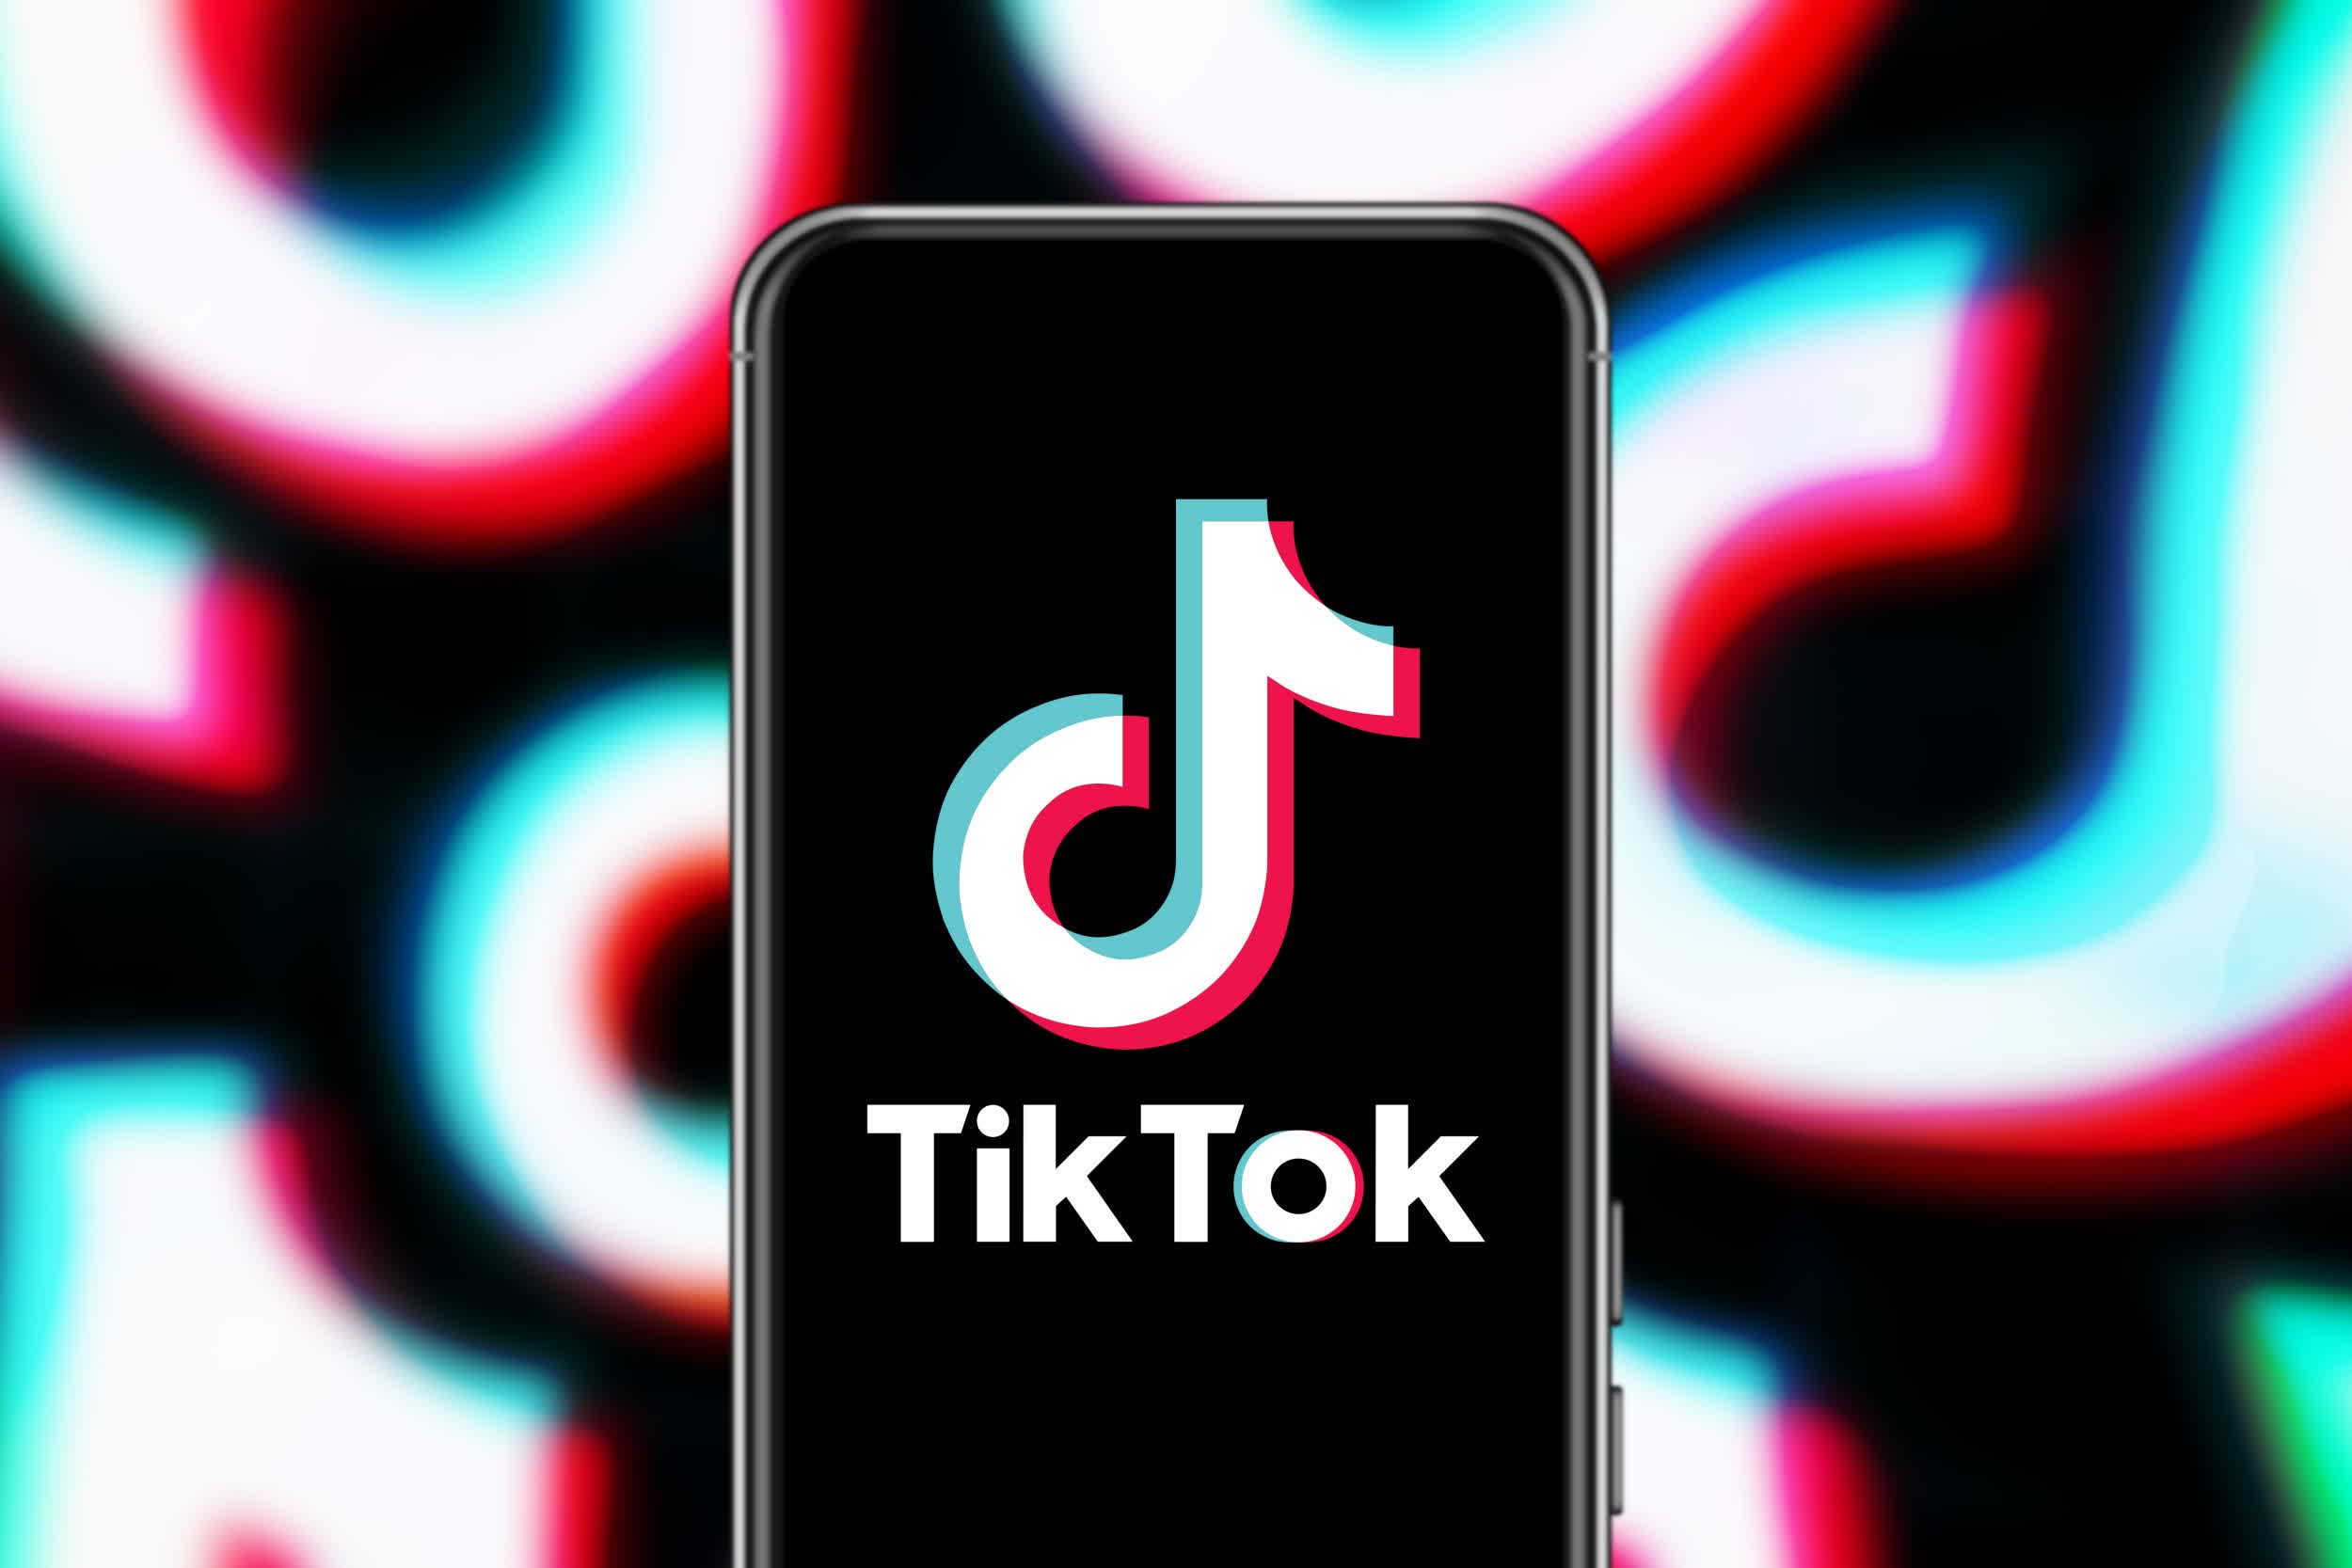 TikTok users aren't happy about the new 10-minute video limit